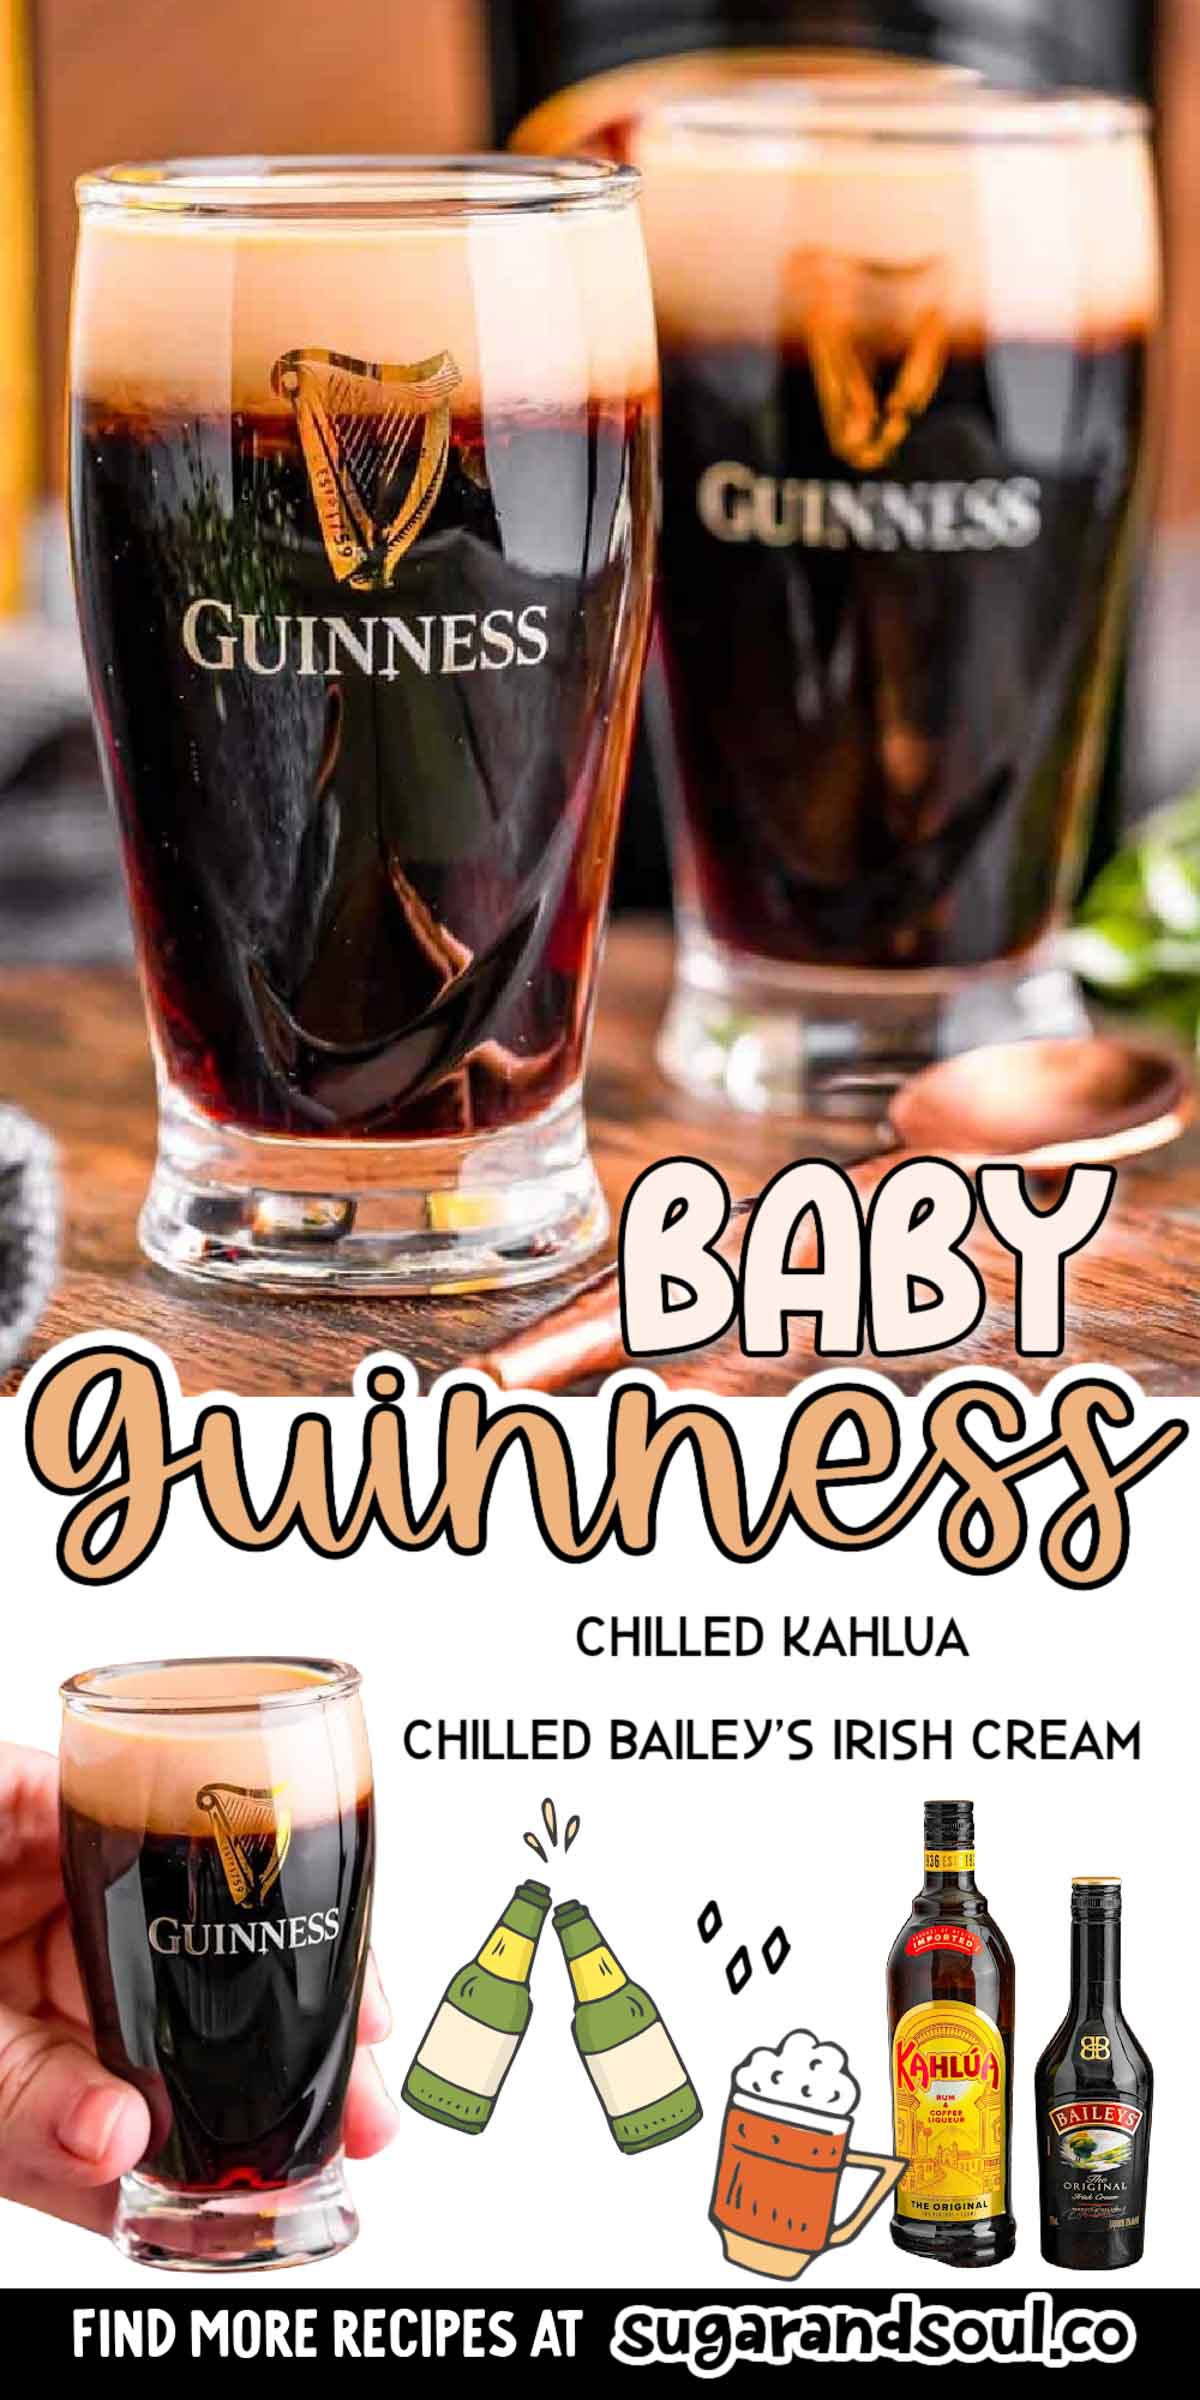 This Baby Guinness Shot is a shooter cocktail made with Kahlua Coffee Liqueur and Bailey's Irish Cream to create a delicious shot that looks like a teeny tiny pint of Guinness! It's perfect for parties and St. Patrick's Day! via @sugarandsoulco